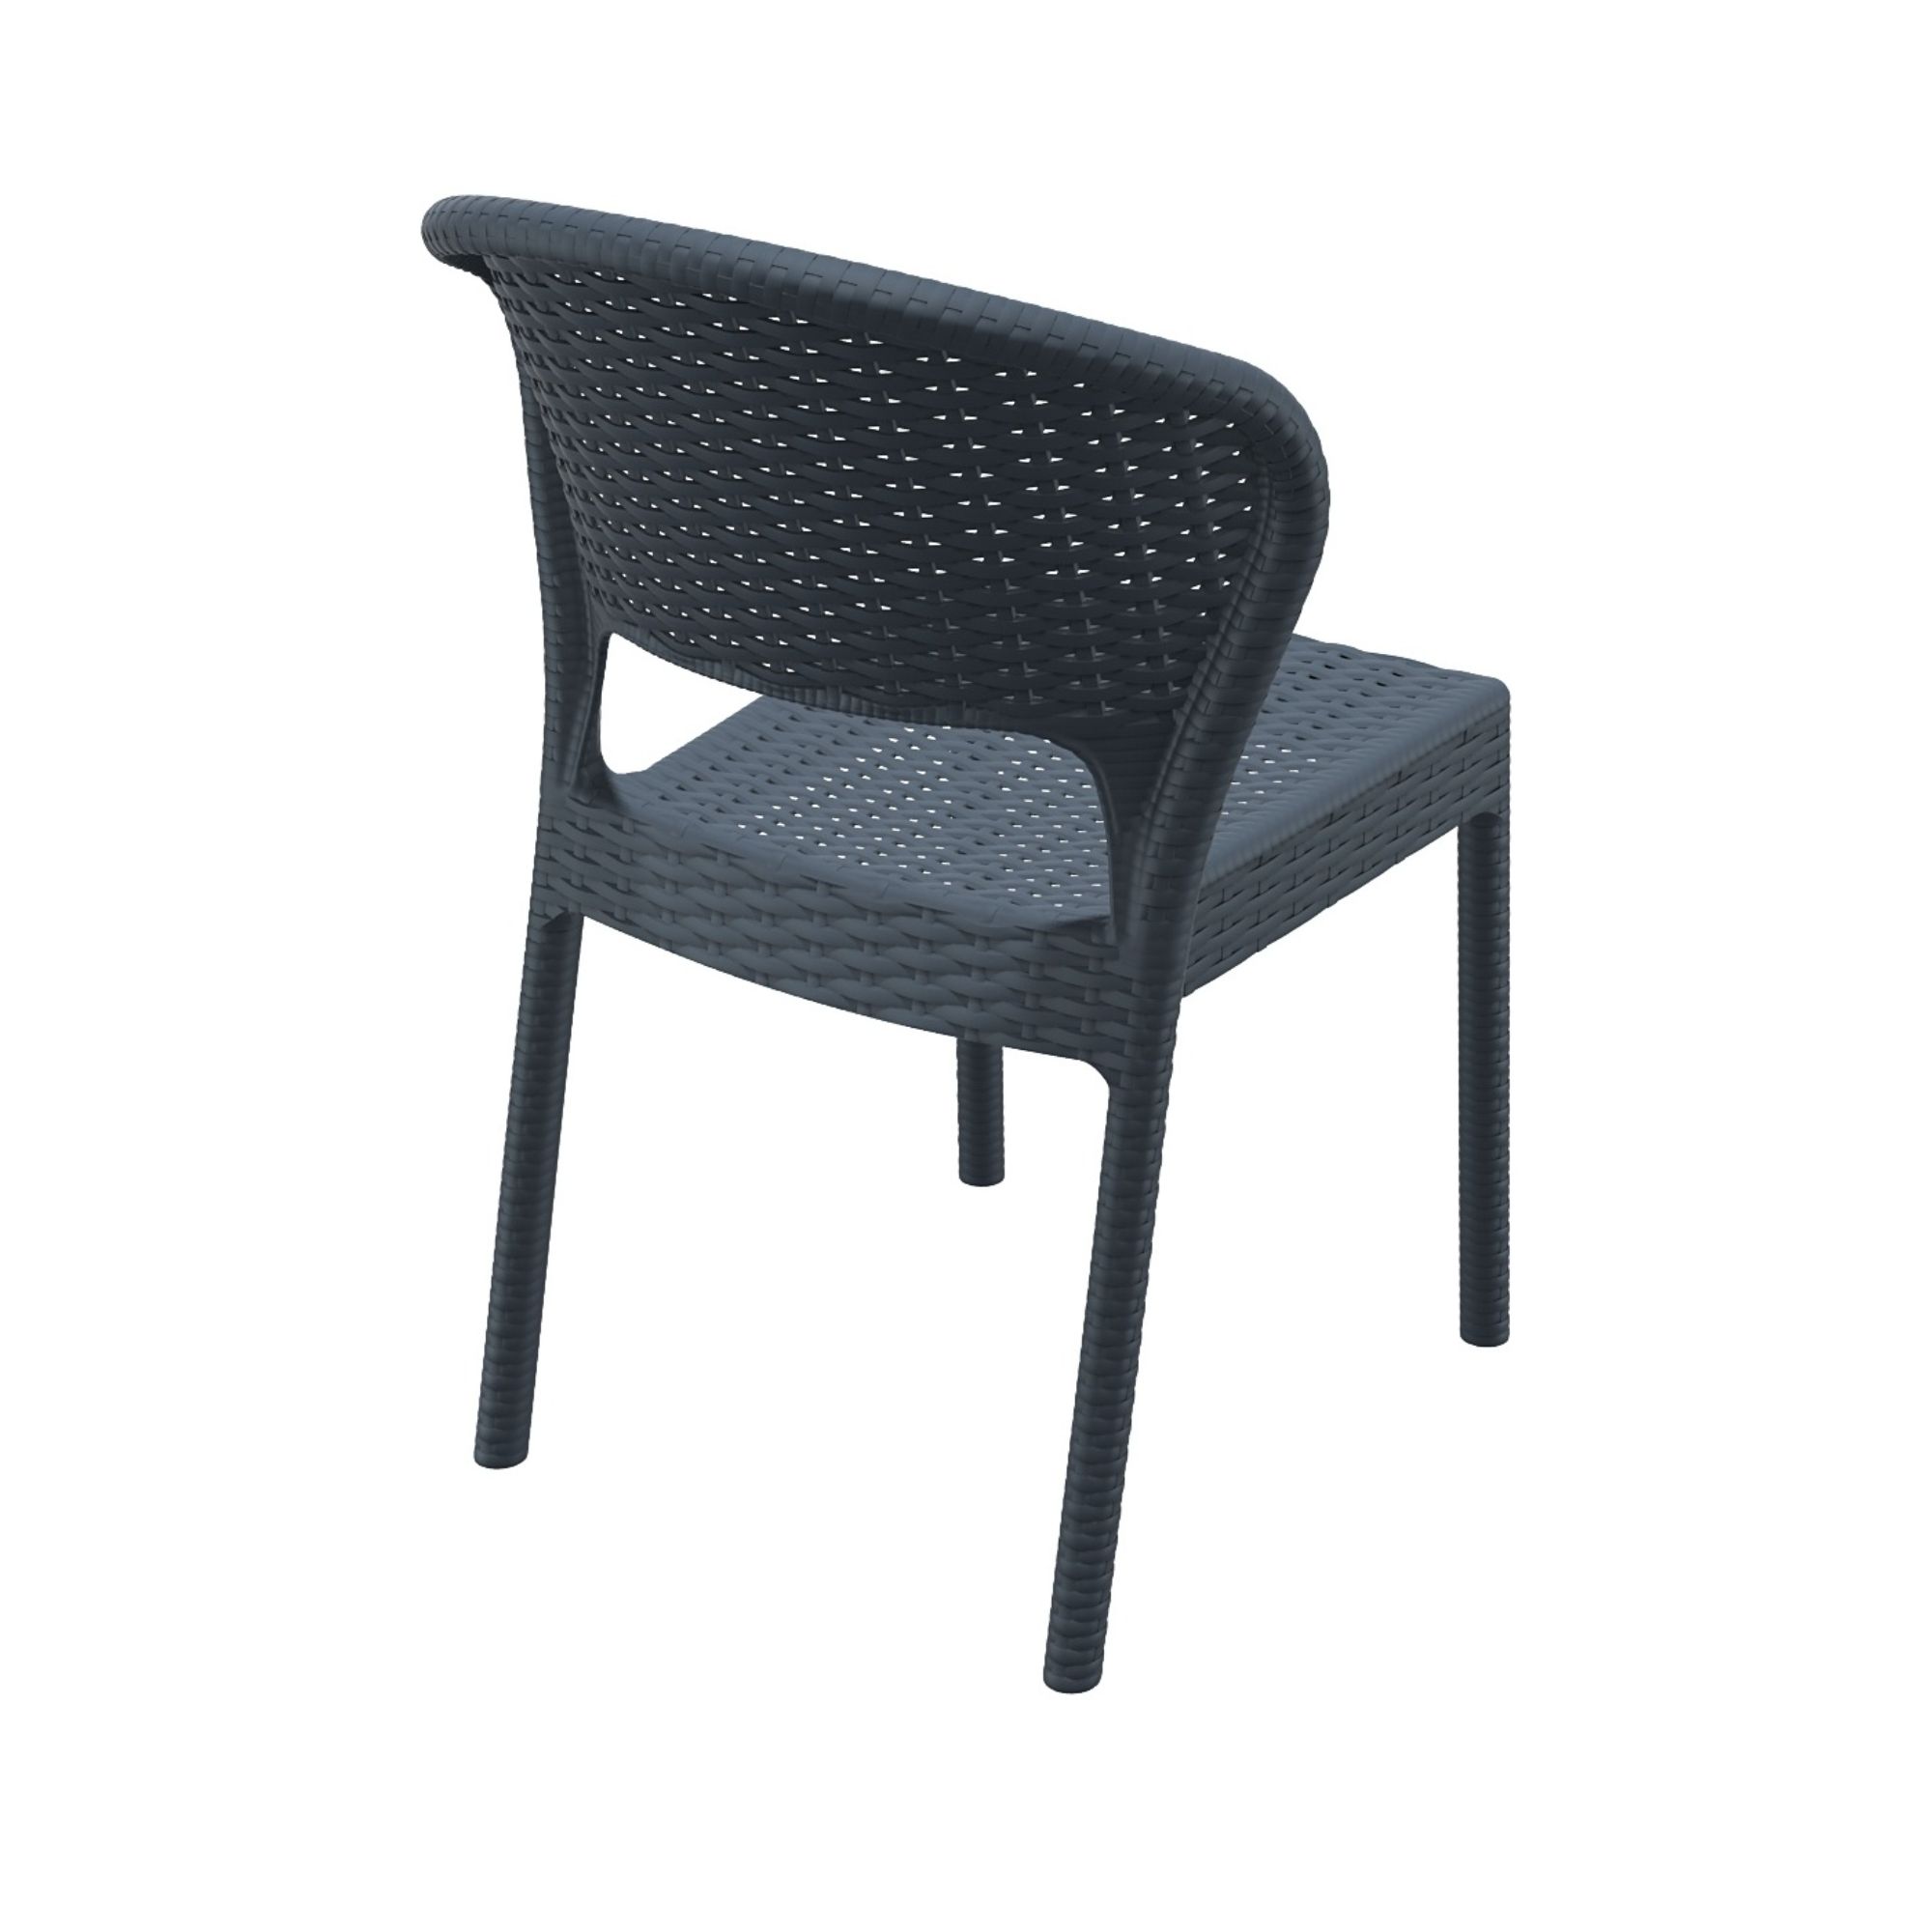 Compamia Dayton Resin Wickerlook Dining Chair 2 Pack Dark Gray - image 2 of 9